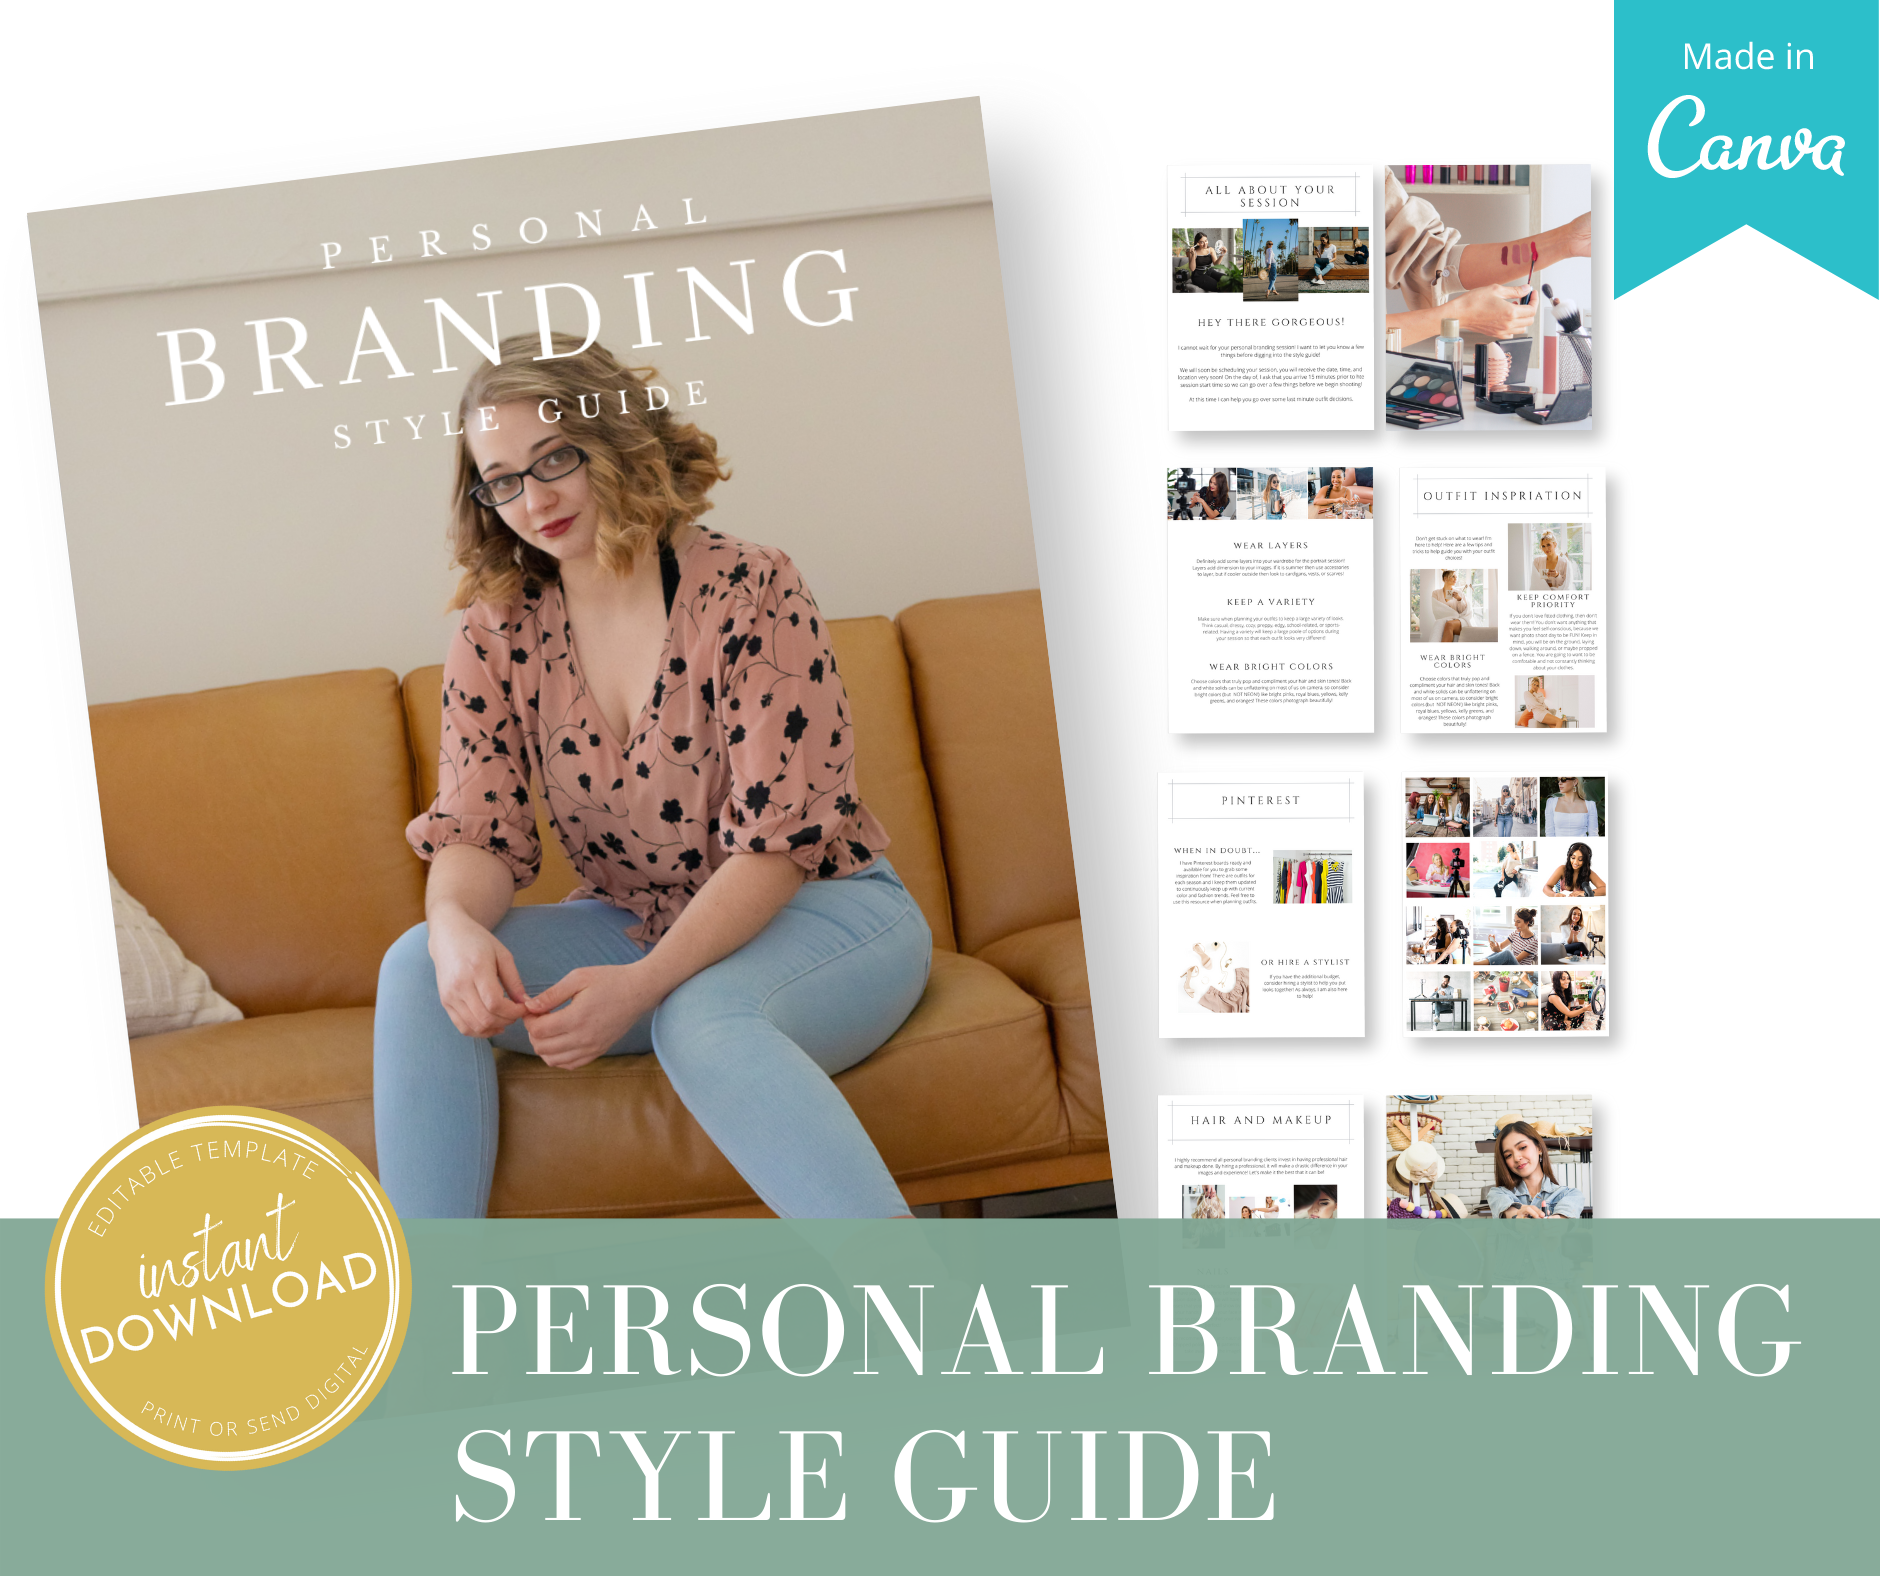 Mockup of branding style guide by Mint Magnolia Photography. Image of a lady sitting on a leather couch.